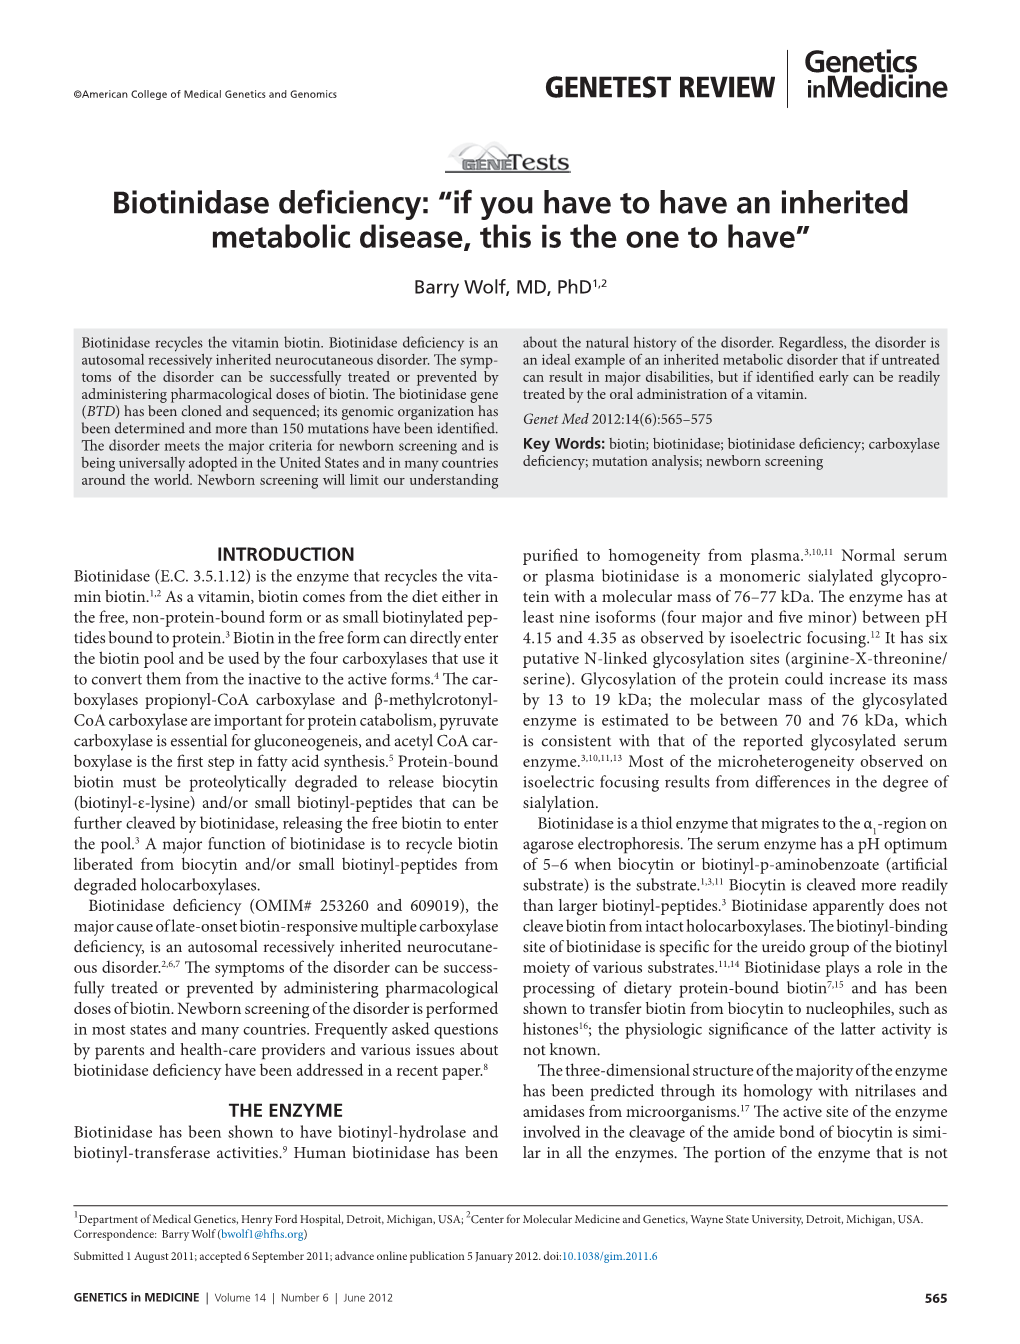 Biotinidase Deficiency: “If You Have to Have an Inherited Metabolic